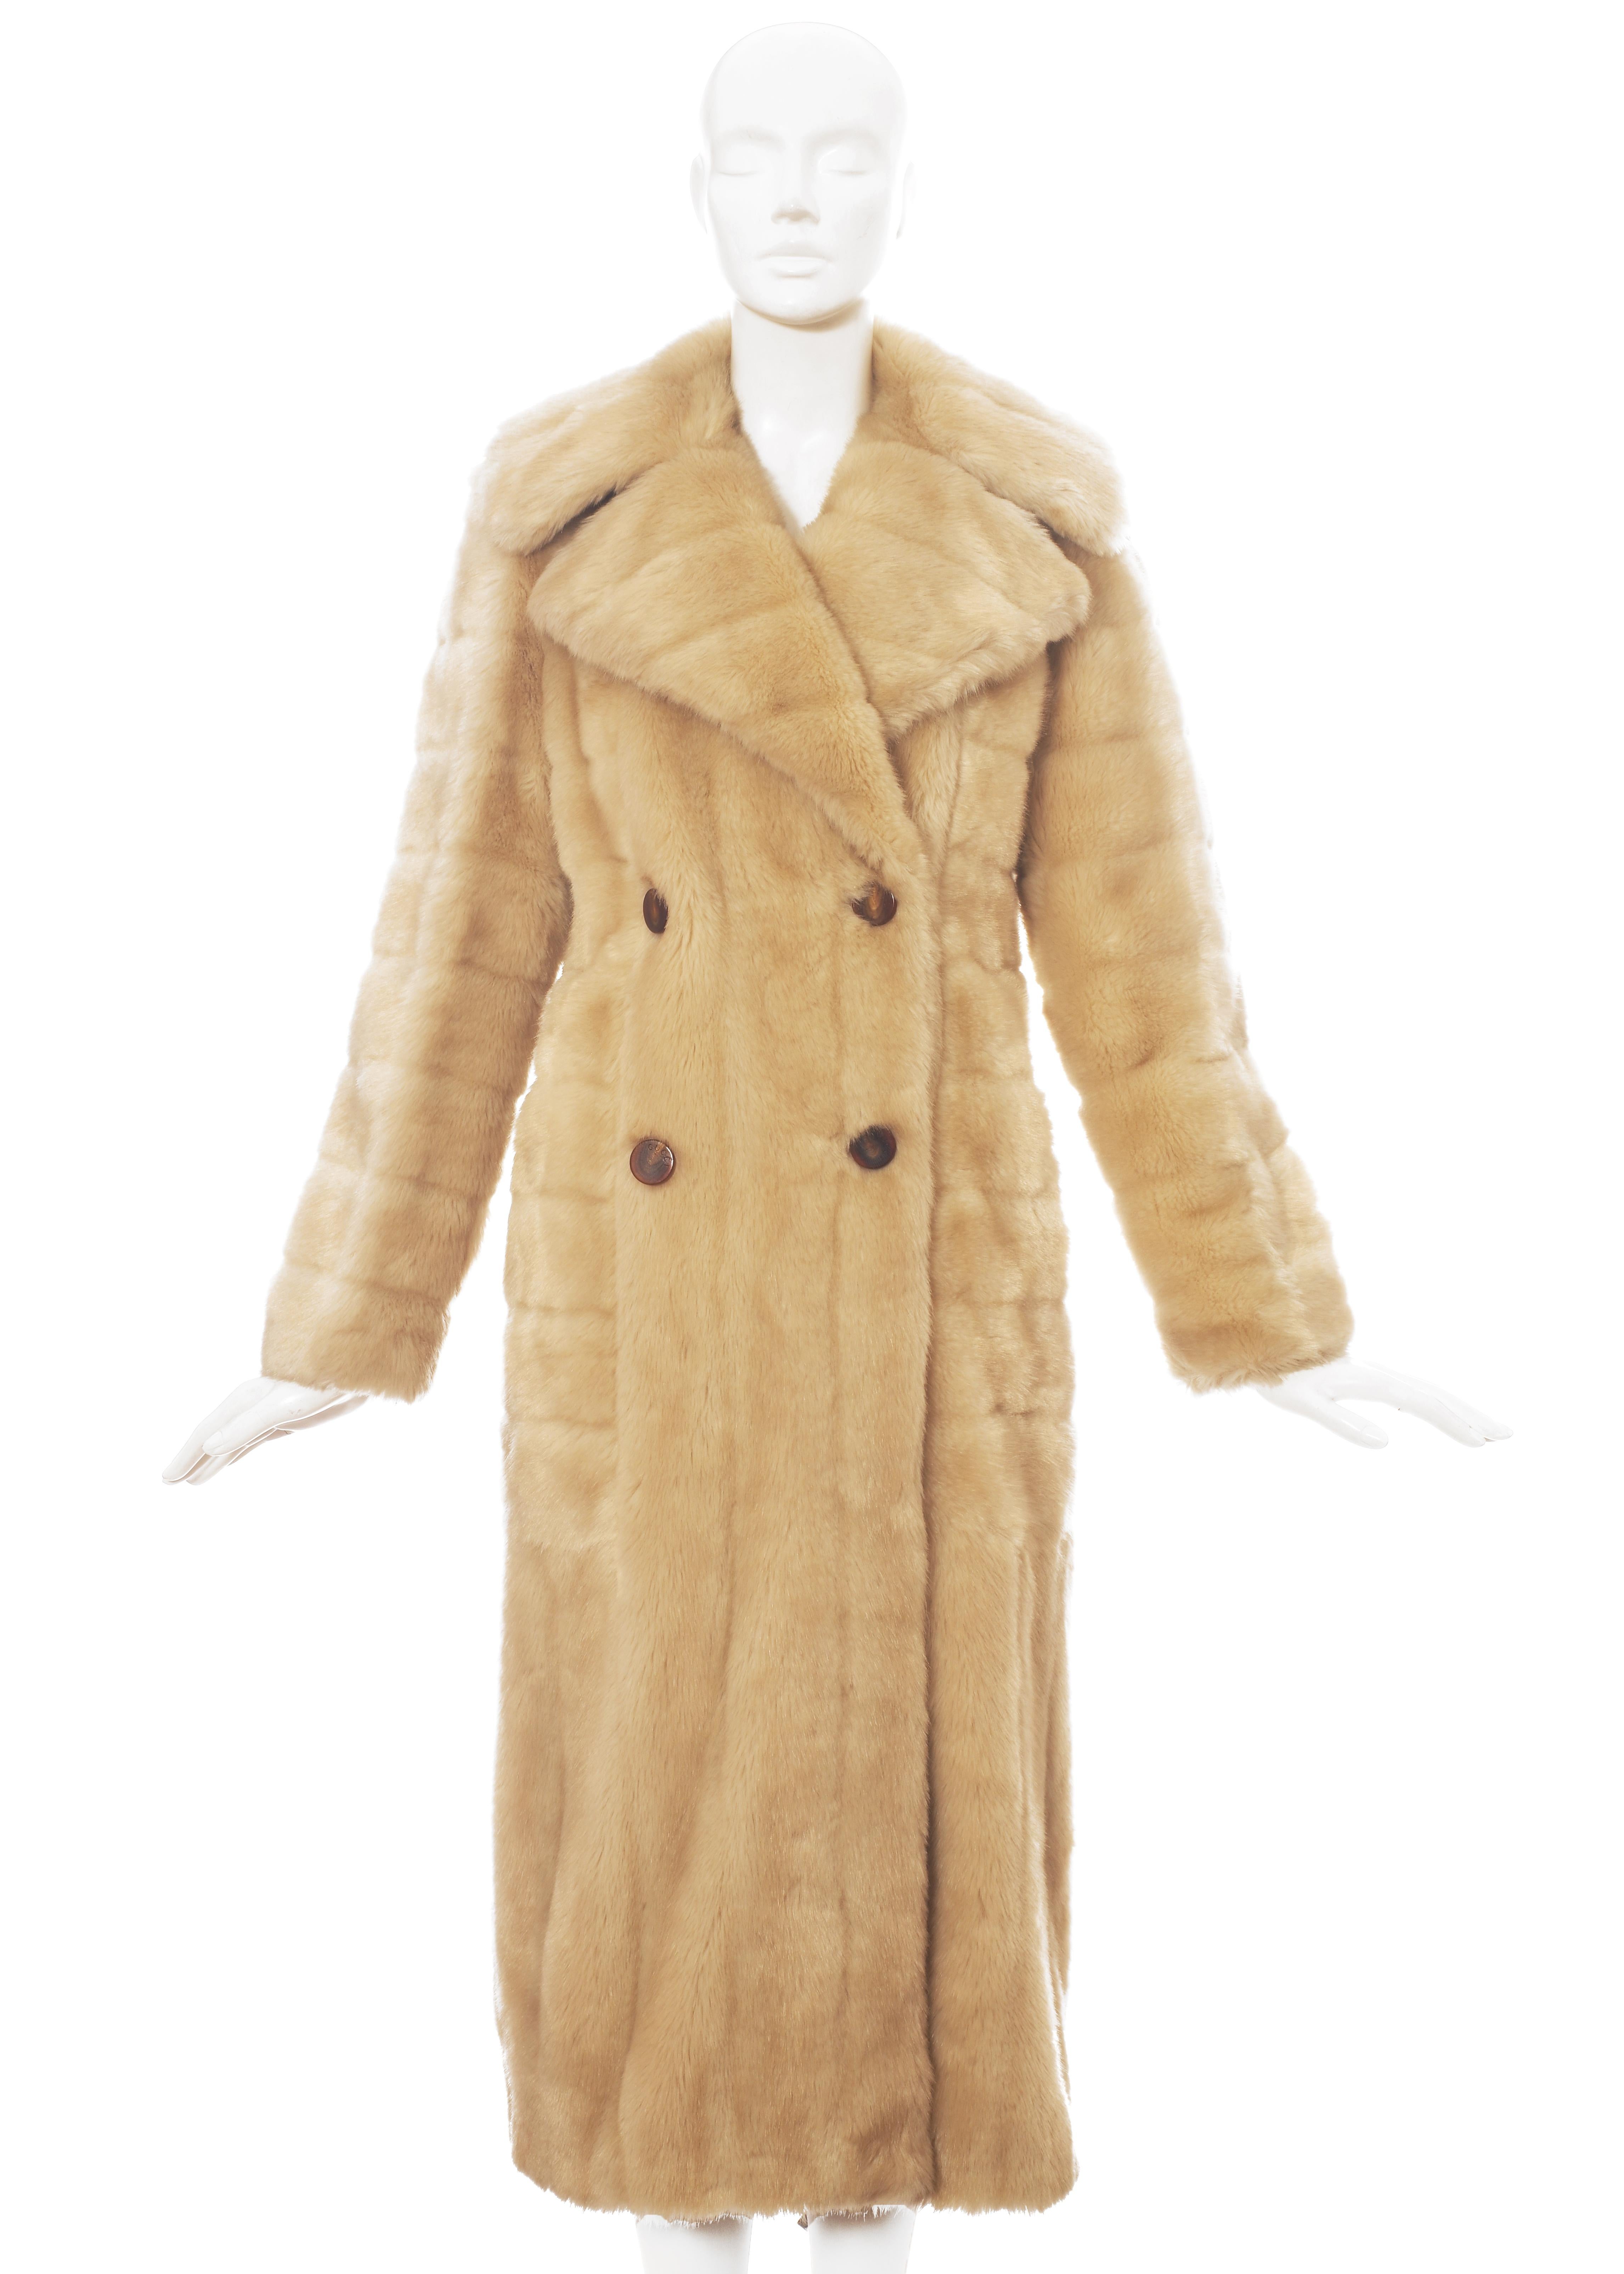 Gucci by Tom Ford cream faux fur double breasted coat with large collar and silk lining

Fall-Winter 1996